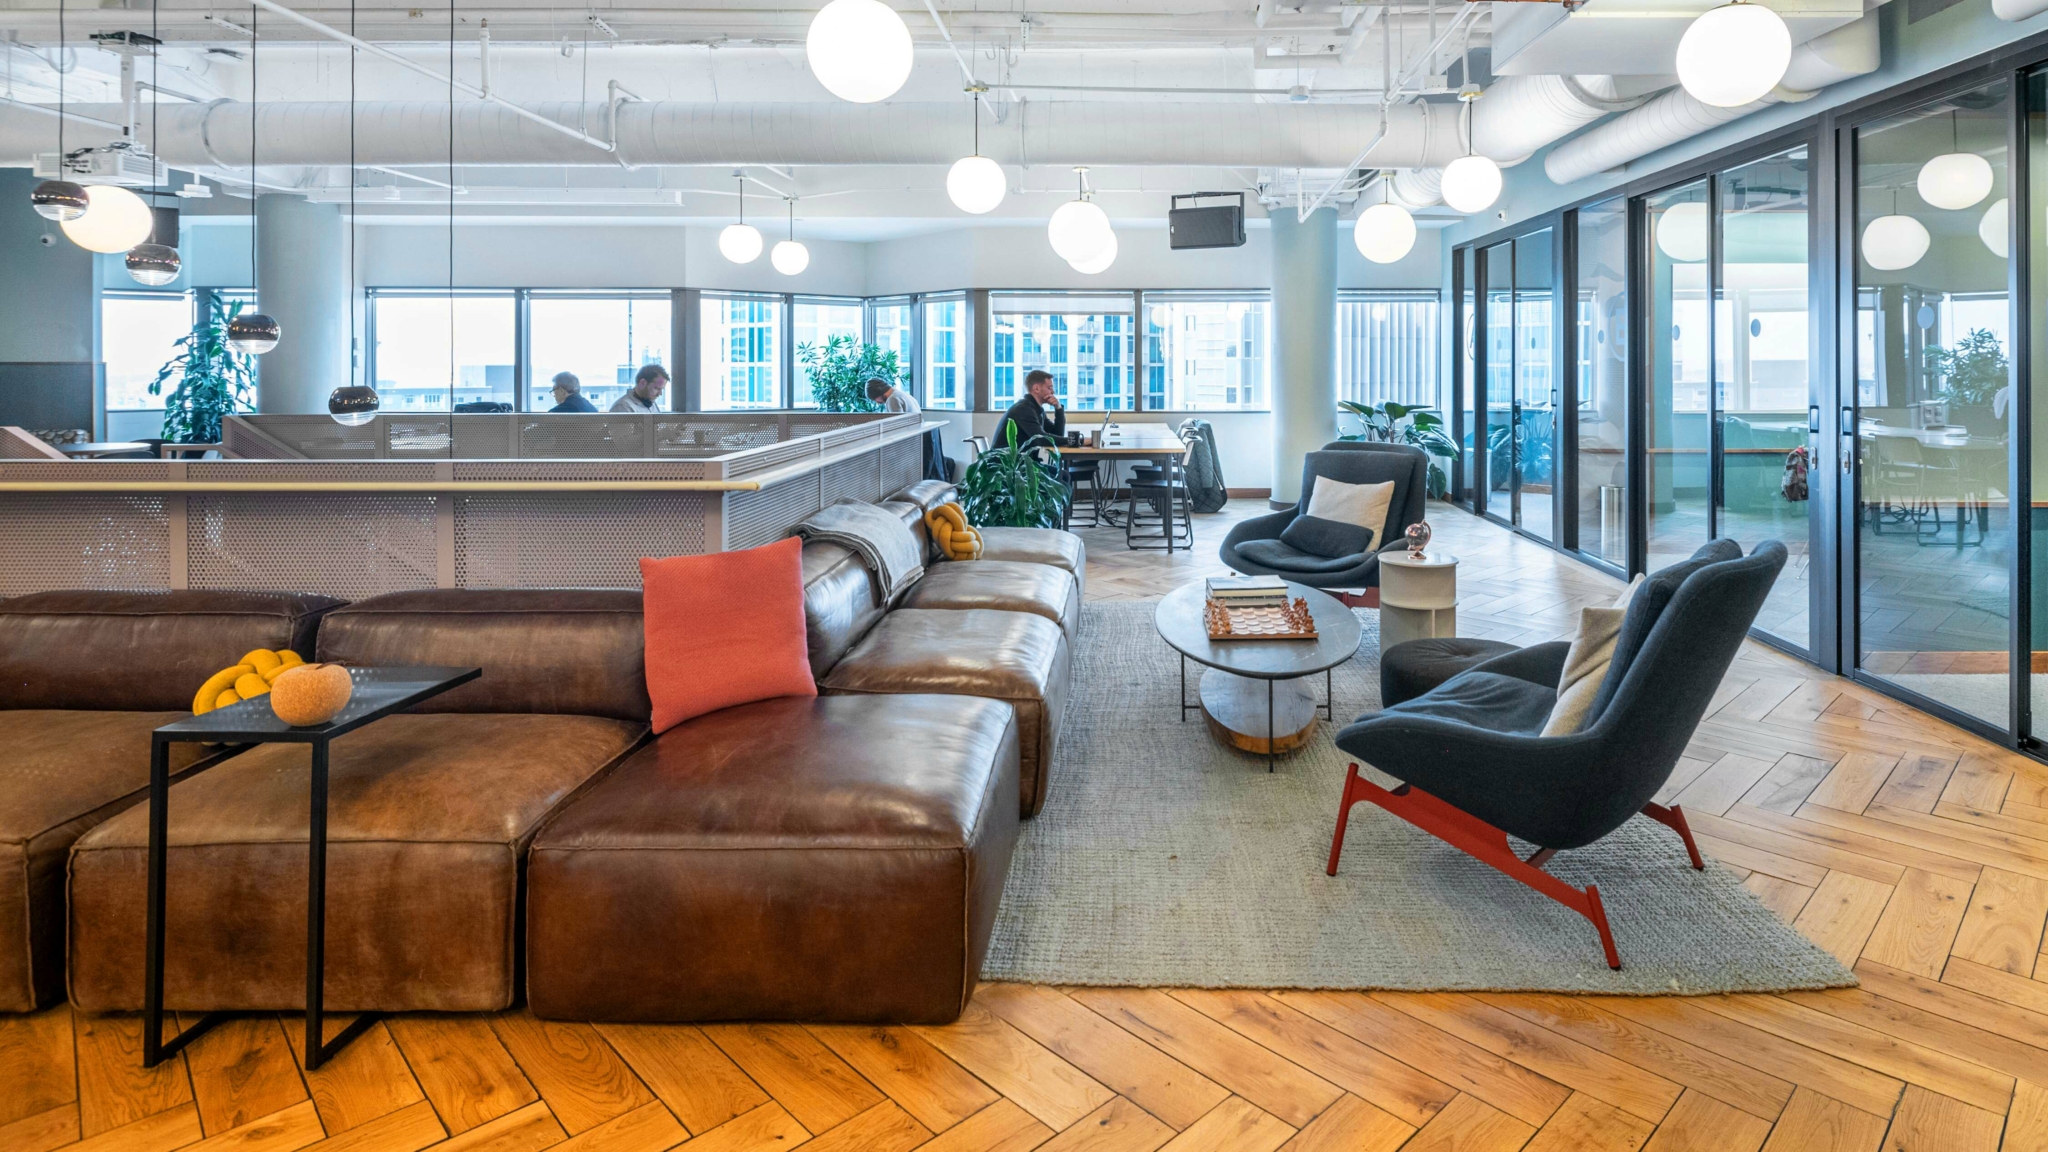 Boston Consulting Group Opens First-Ever Office in Nashville at WeWork -  WeWork Newsroom